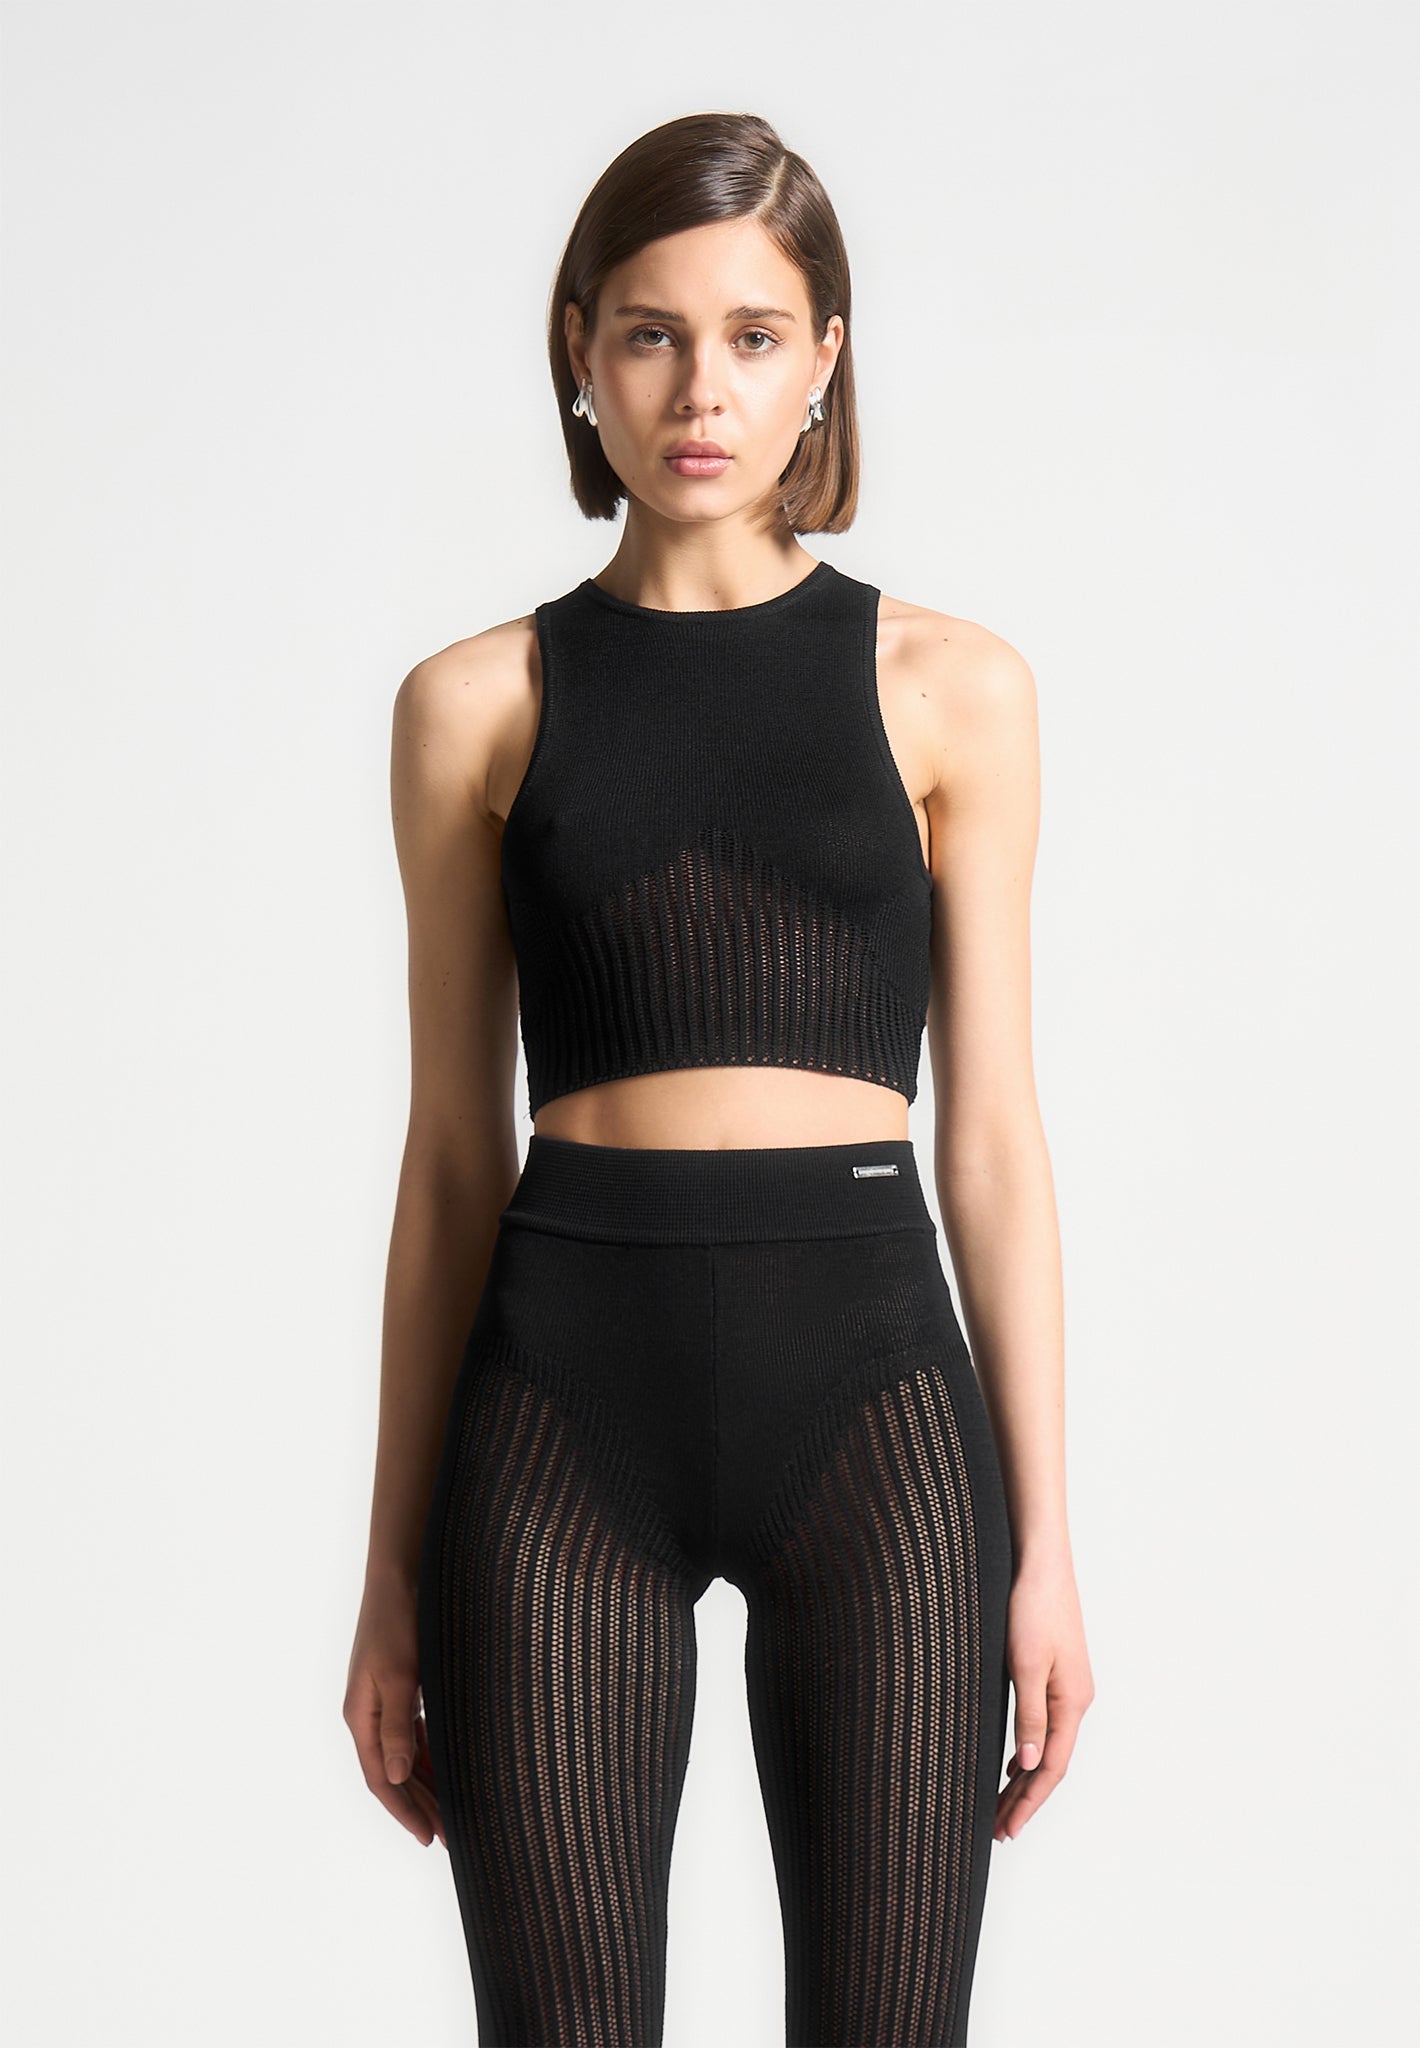 Knitted Sleeve Overlay with Bralette - Black